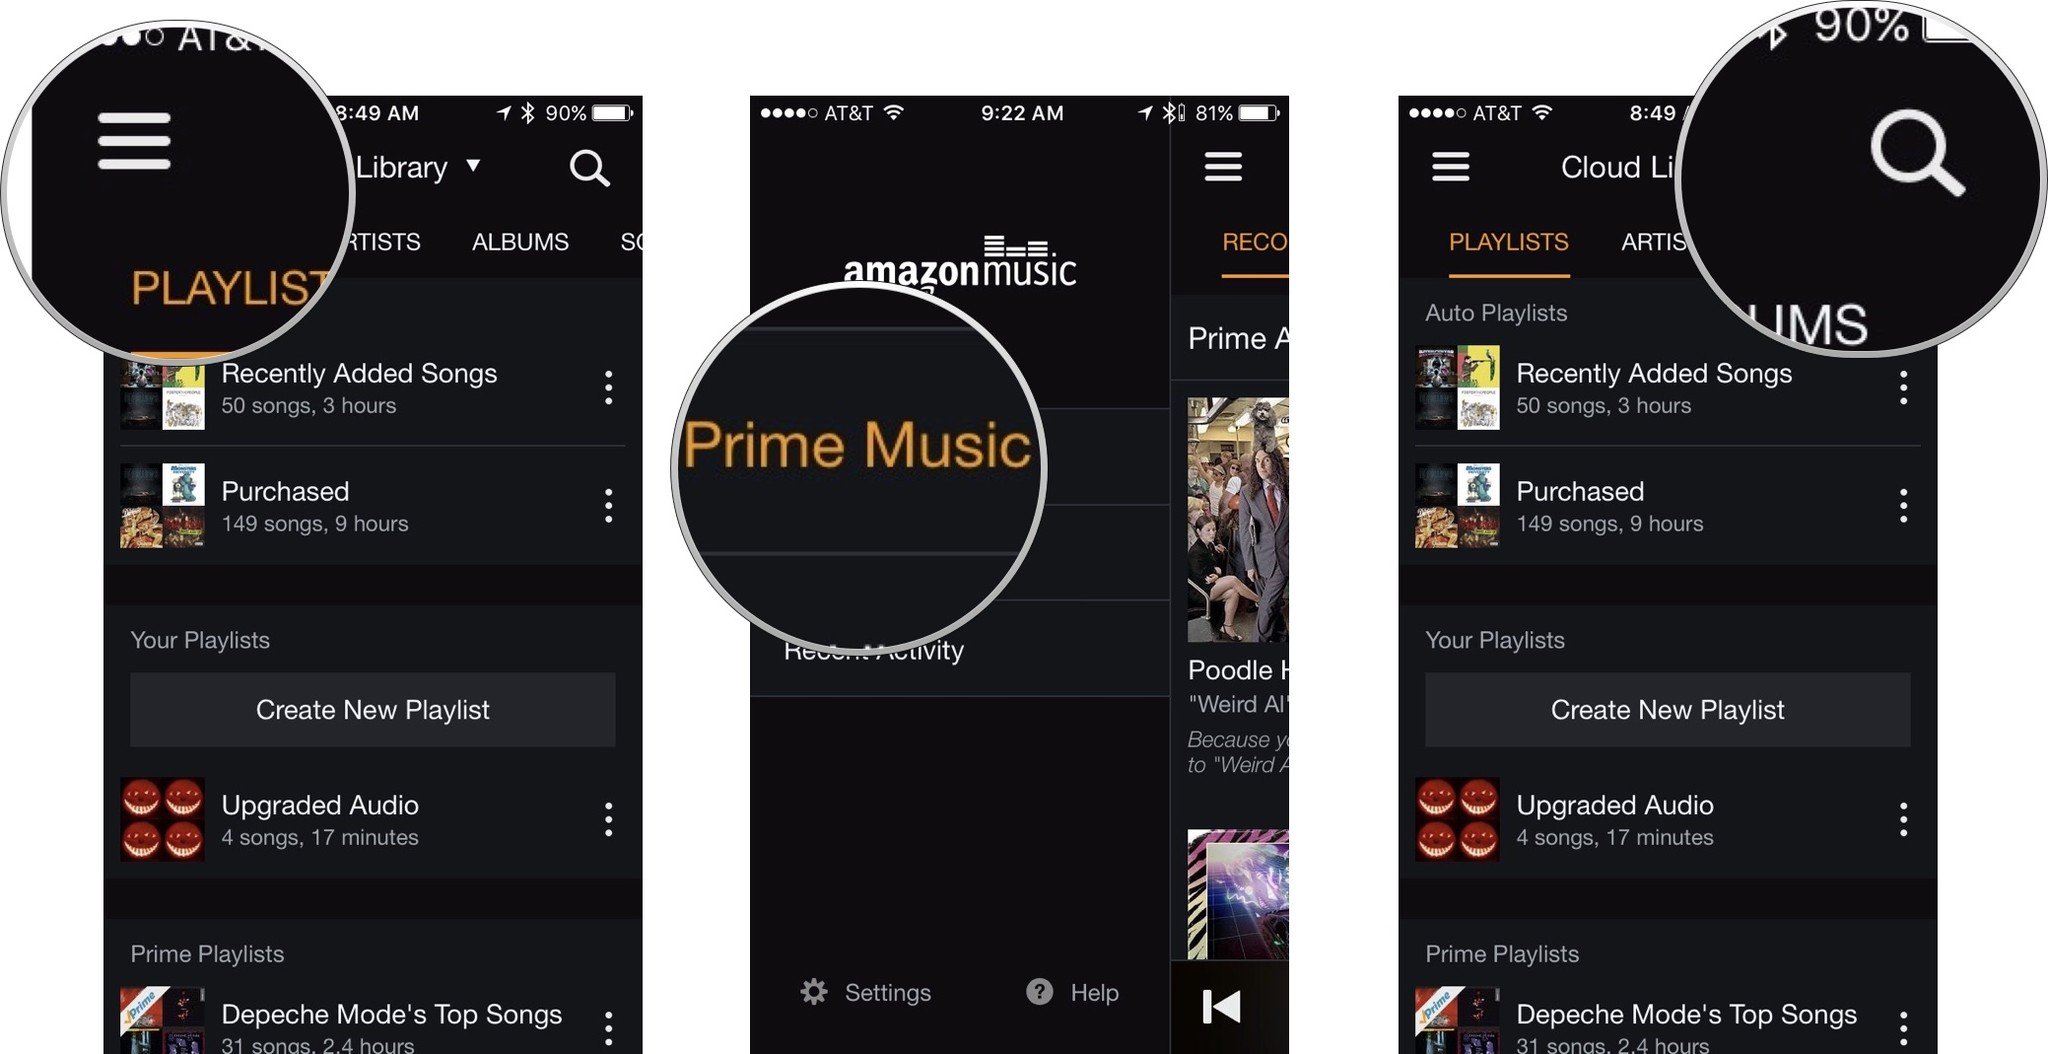 Search for content in Amazon Music